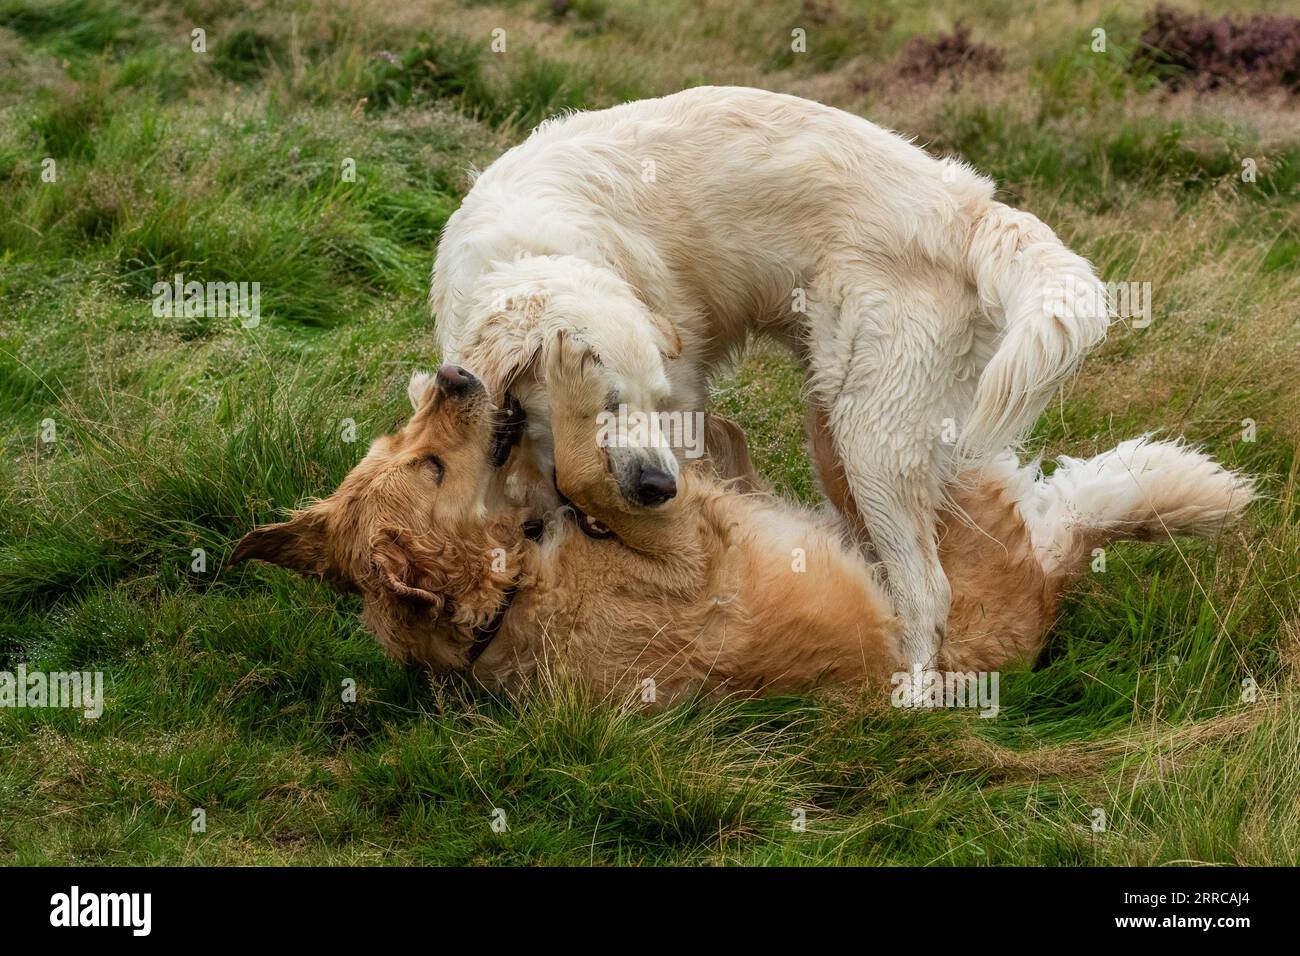 Golden retrievers (one pale and one golden) playing together on grass. Stock Photo